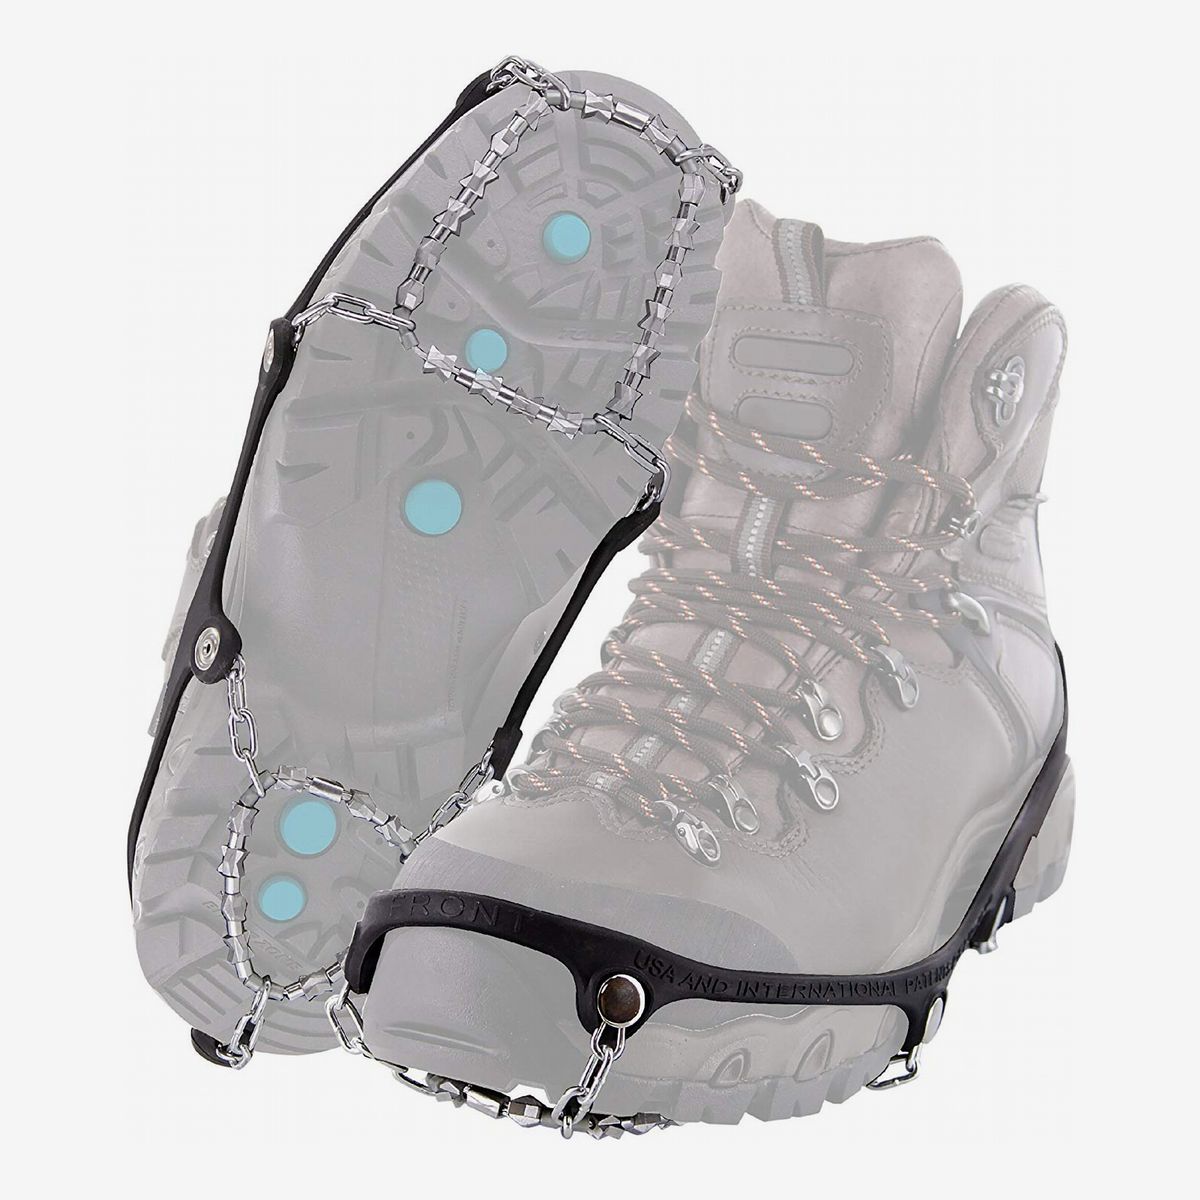 Reflective Heel ICETRAX V3 Pro Winter Ice Grips for Shoes and Boots StayON Toe Men: 5-9 / Women: 6.5-10.5 Ice Cleats for Snow and Ice V3 Tungsten, S/M 